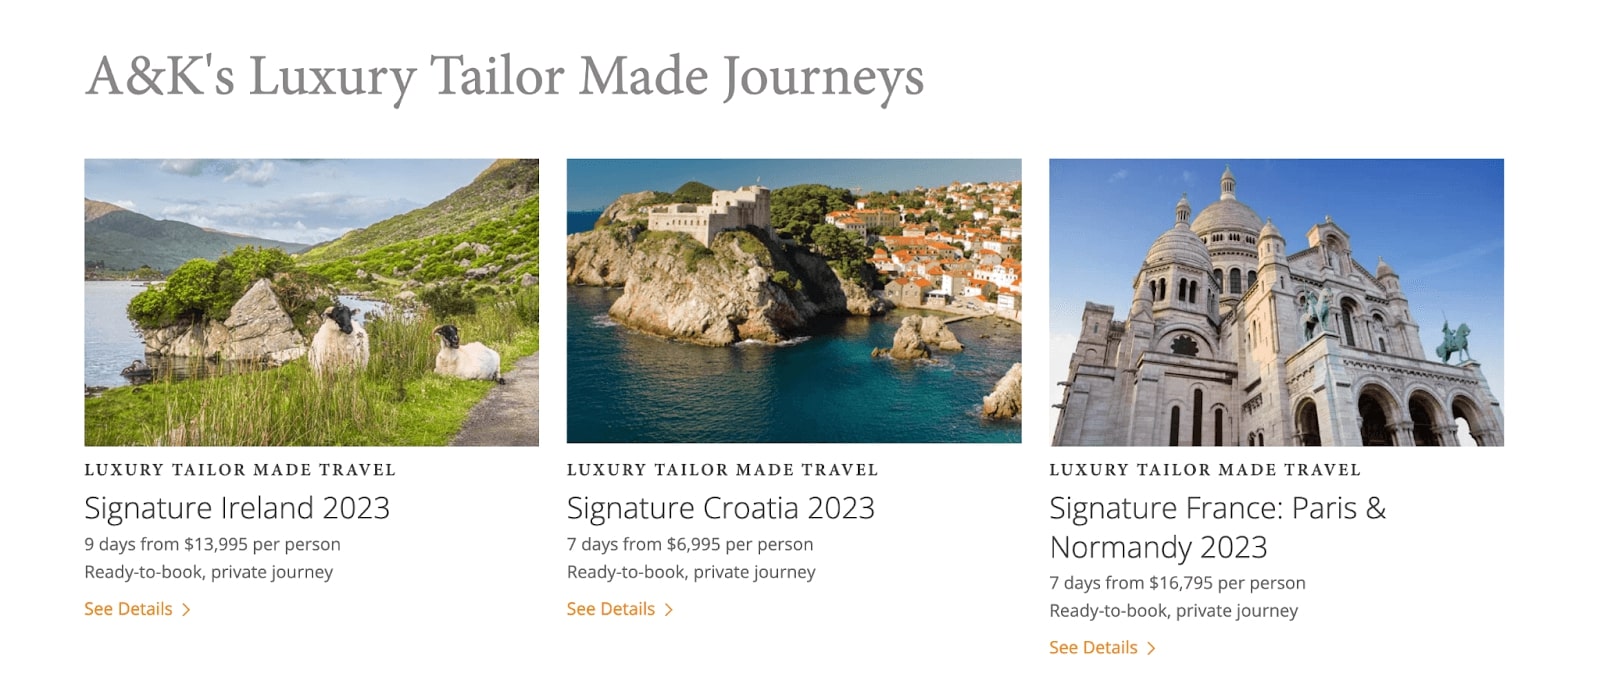 How to drive more sale with better image for travel agency website Image 14